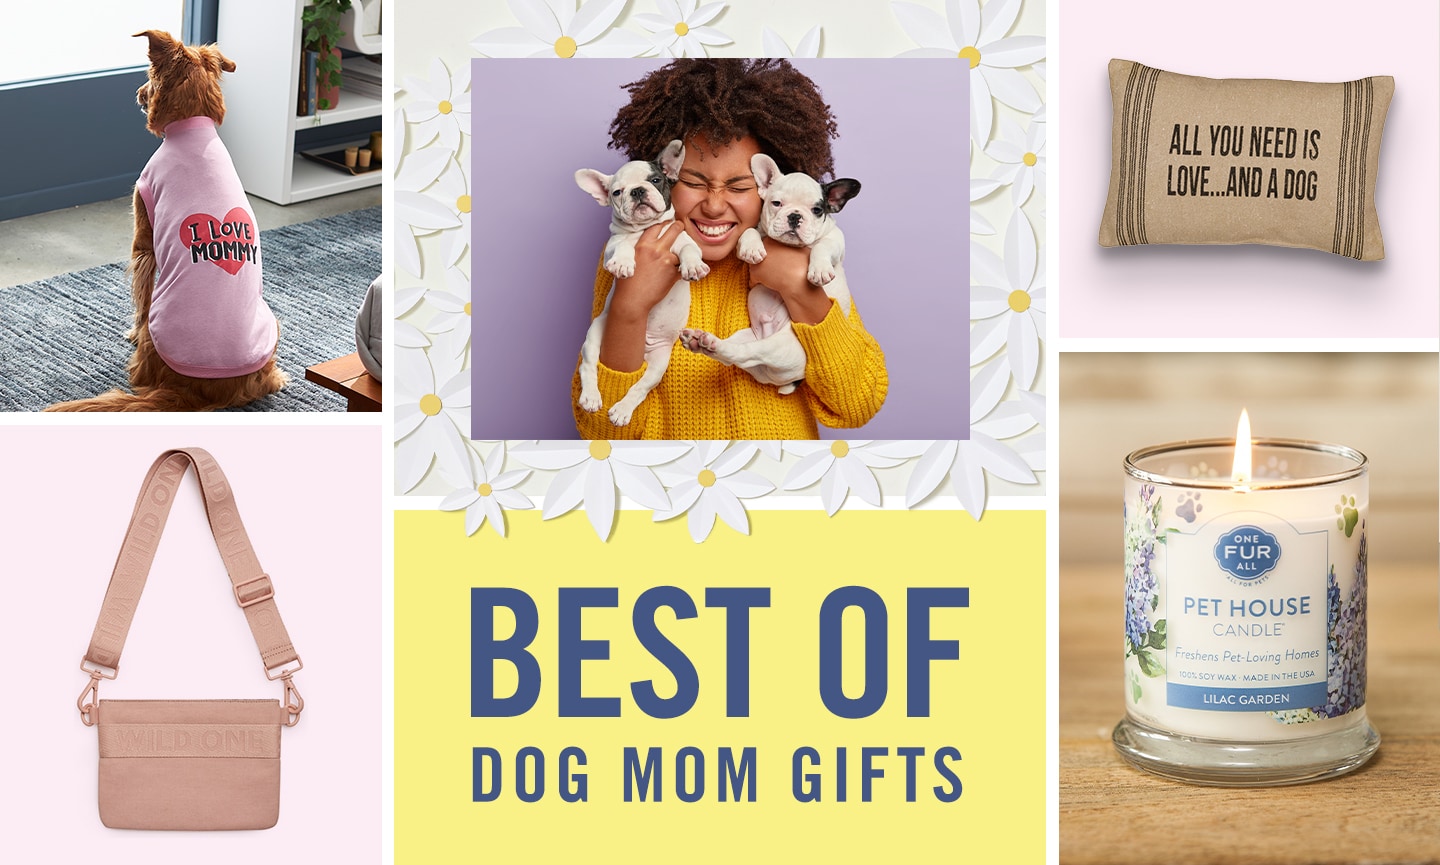 https://media-be.chewy.com/wp-content/uploads/2022/04/24215732/best-dog-mom-gifts.jpg